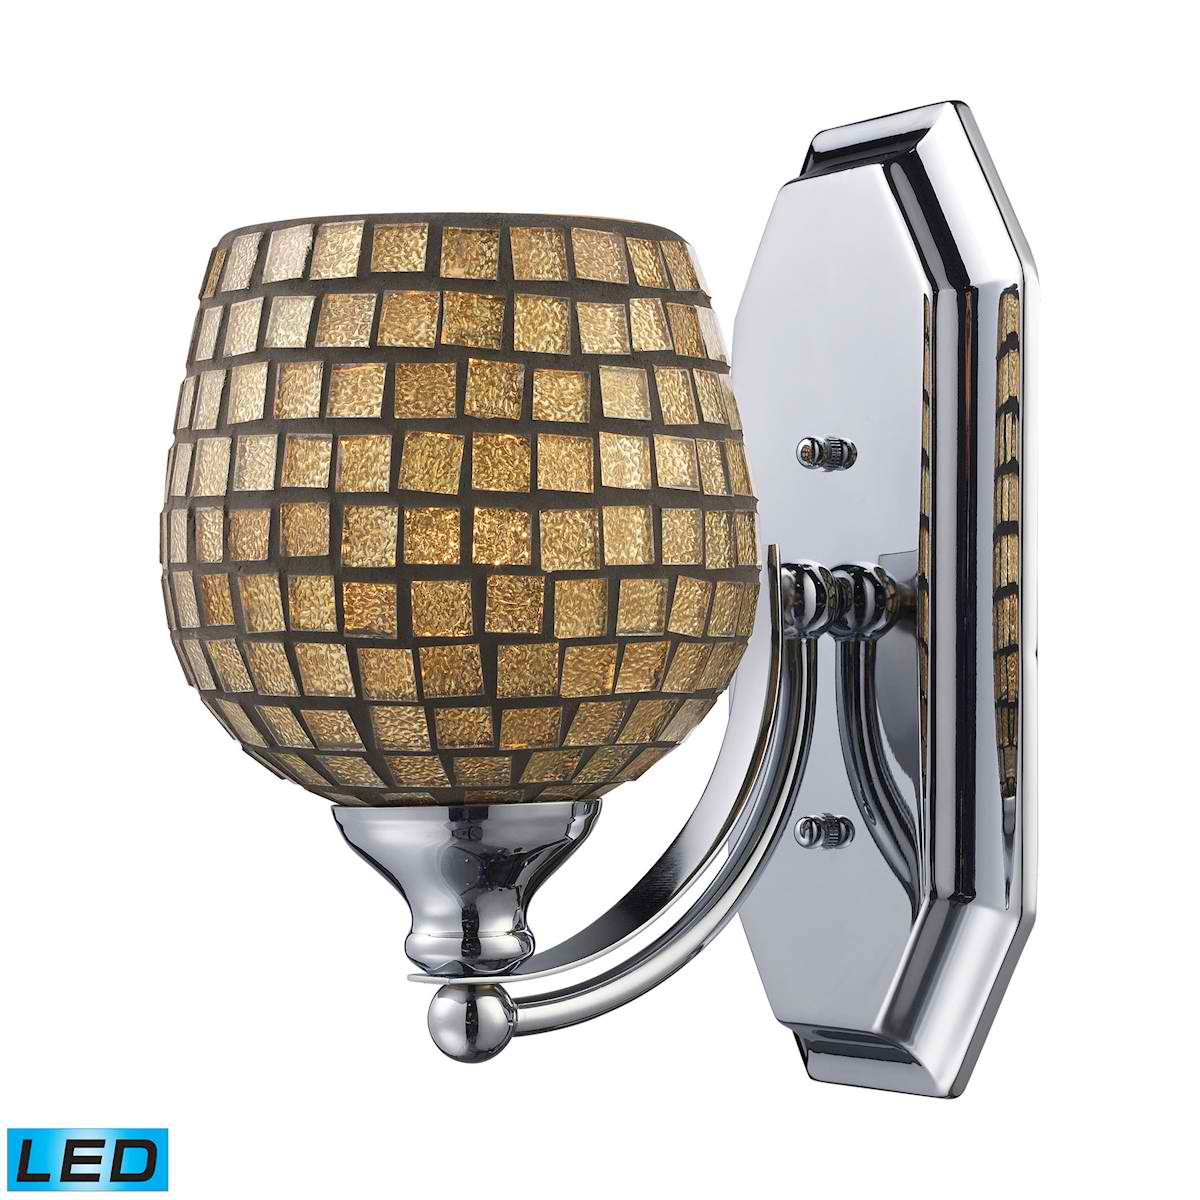 1 Light Vanity in Satin Nickel and Gold Mosaic Glass - LED Offering Up To 800 Lumens (60 Watt Equivalent)